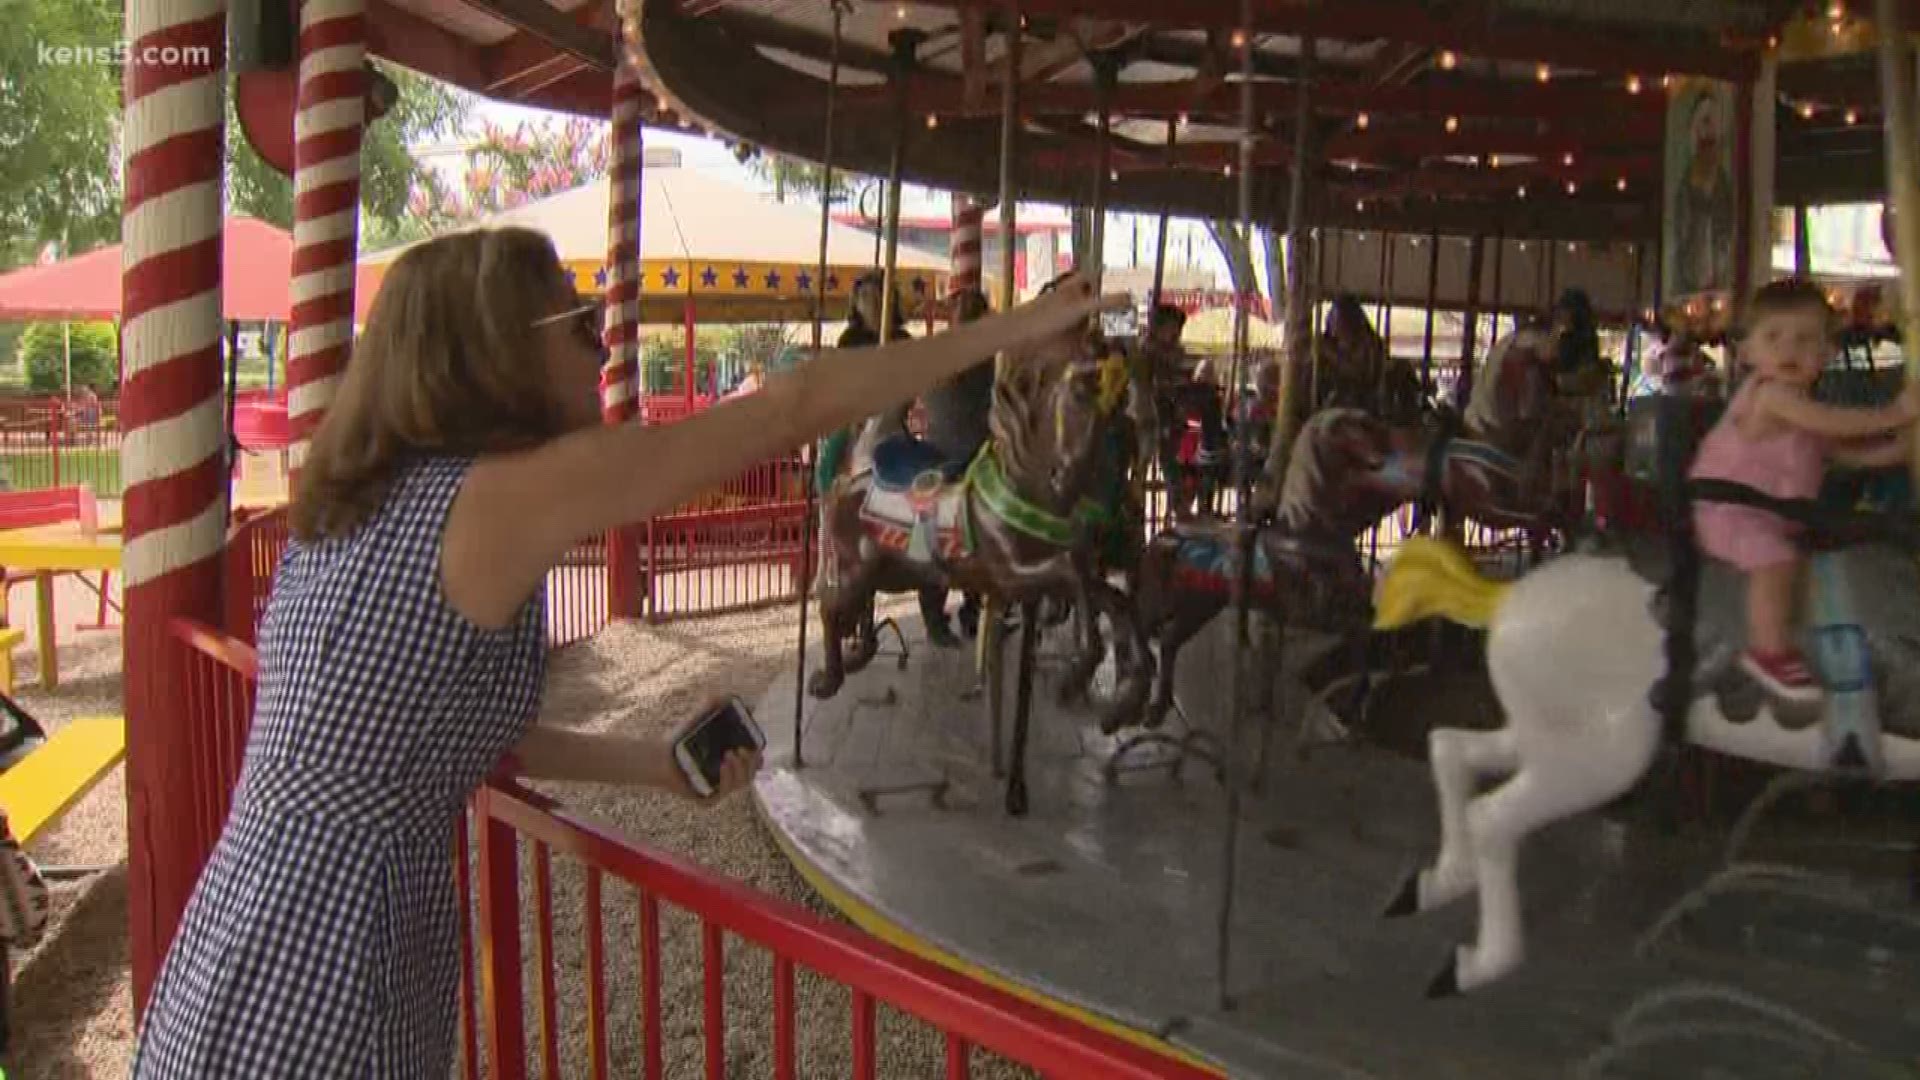 A historian San Antonio amusement park is in its final hours of operation on Broadway Street before moving to a new home.